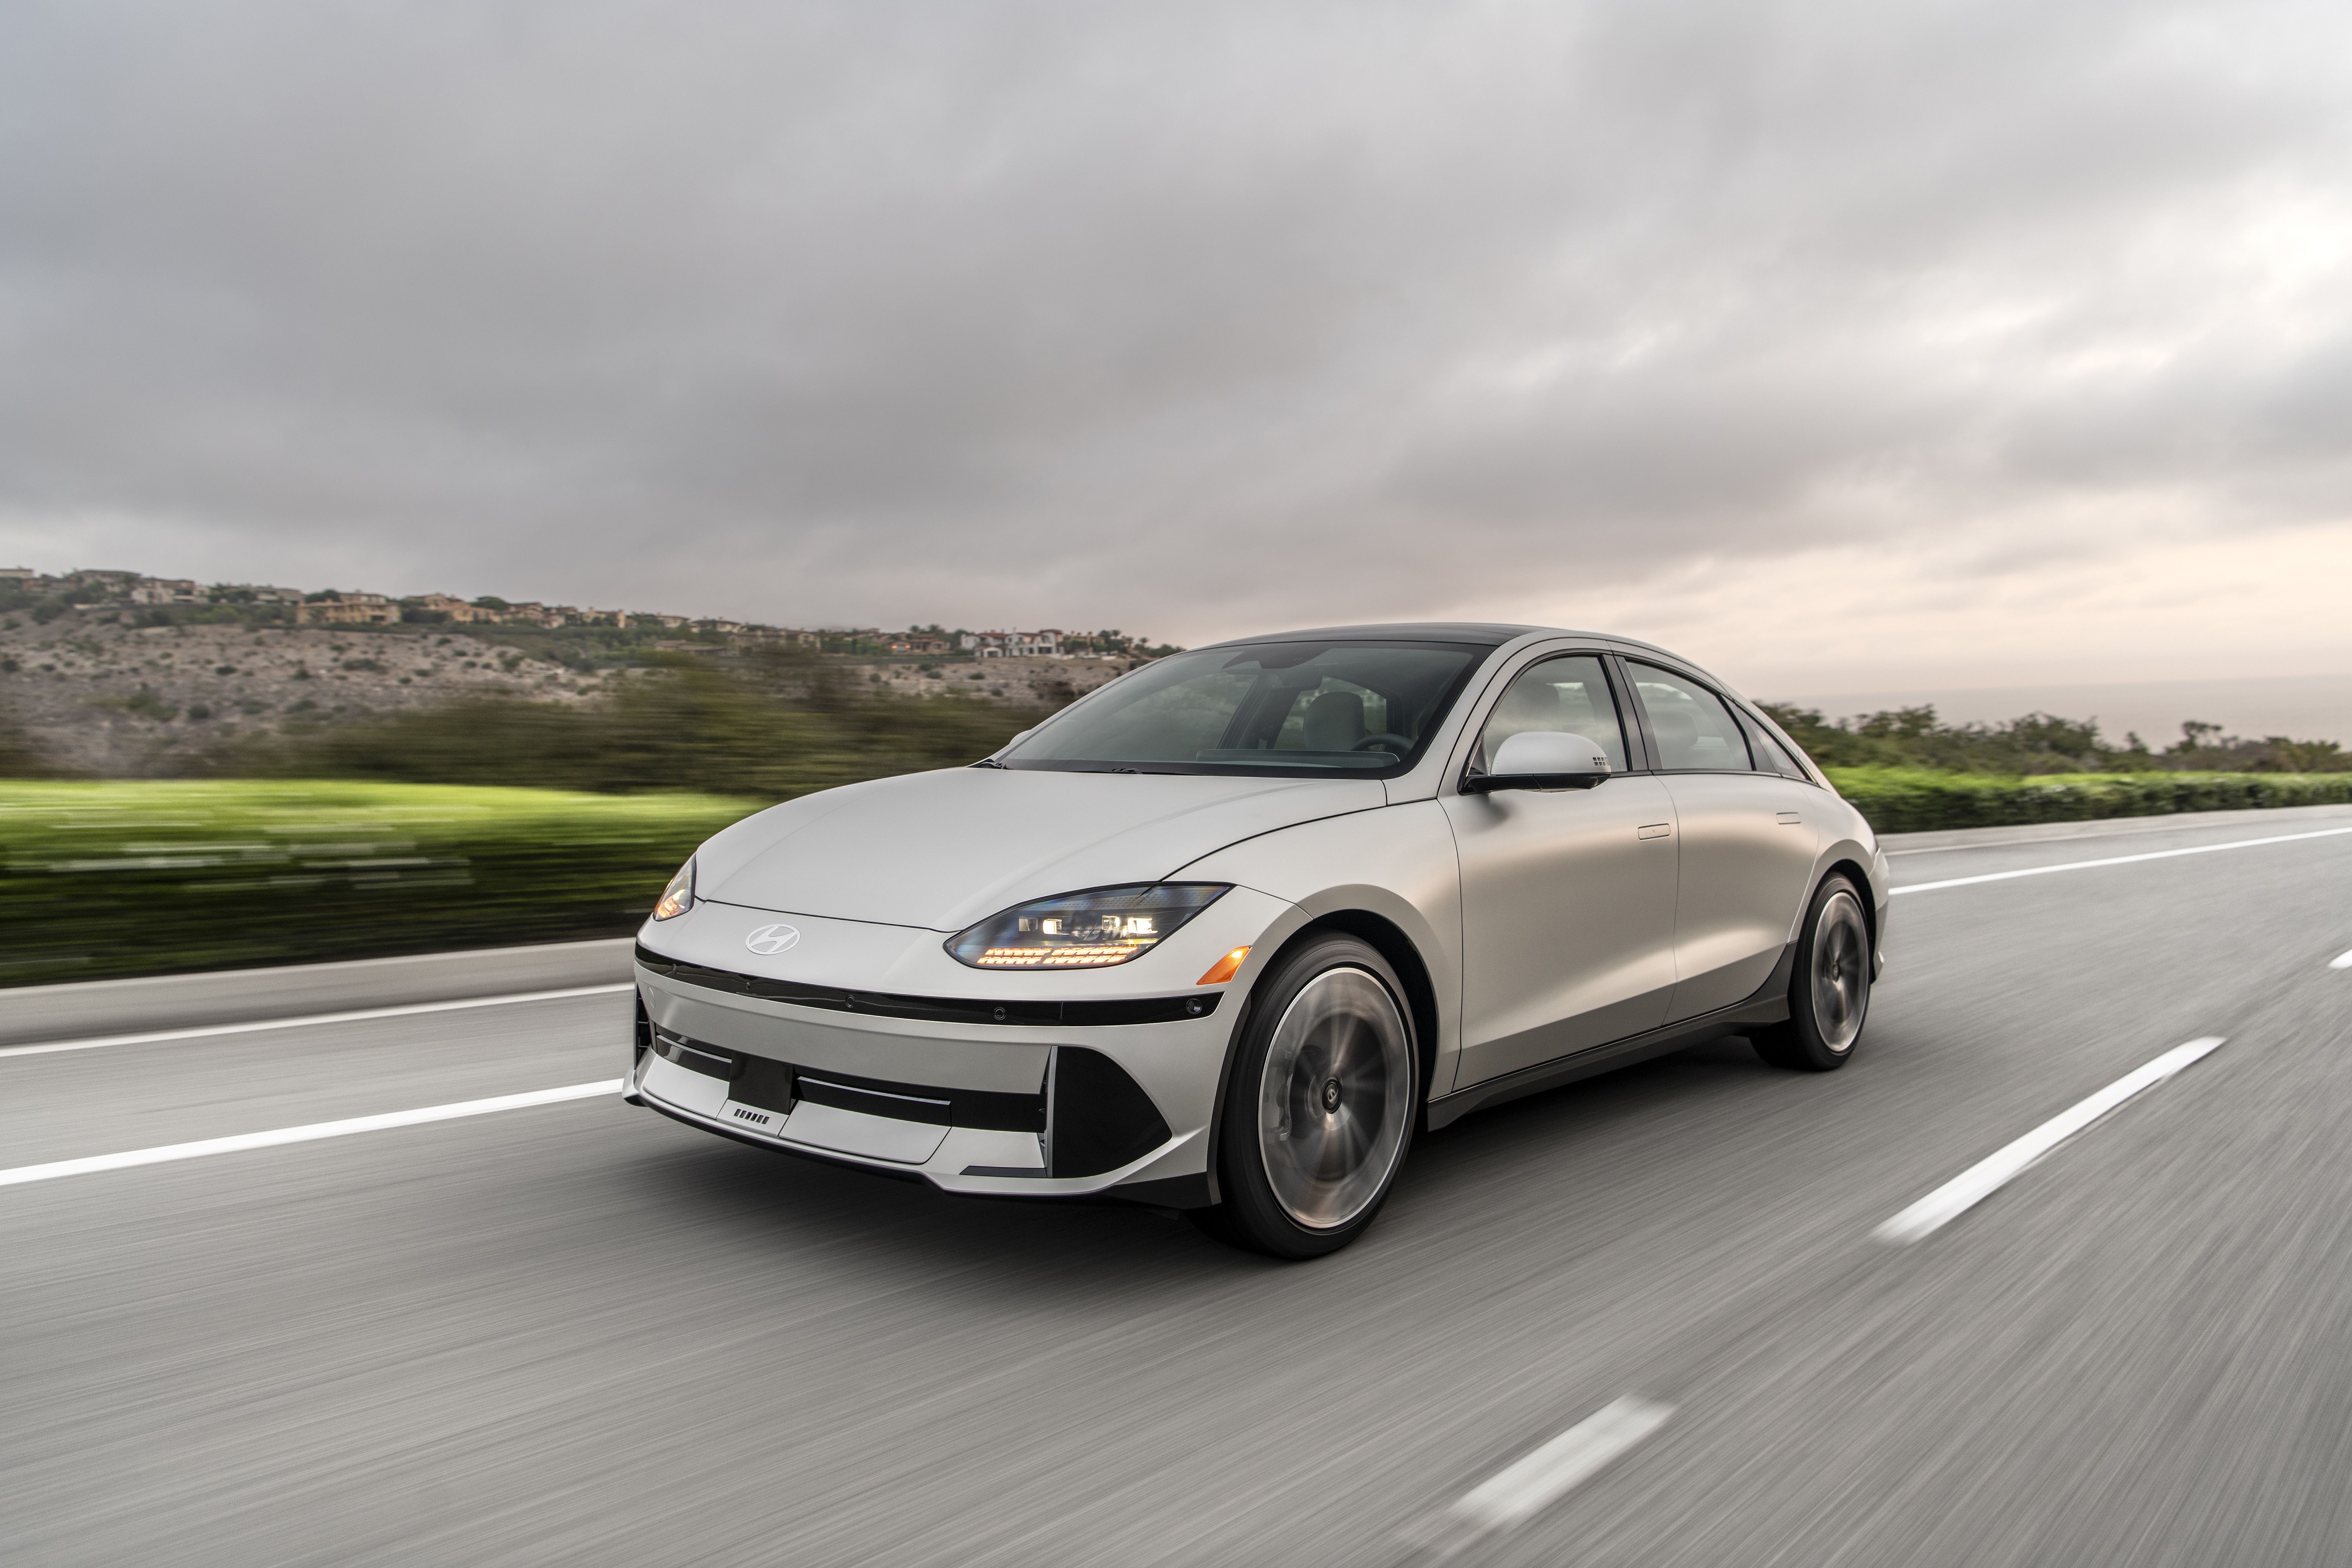 VW aims to dethrone the Tesla Model 3 with its long-ranging ID.7